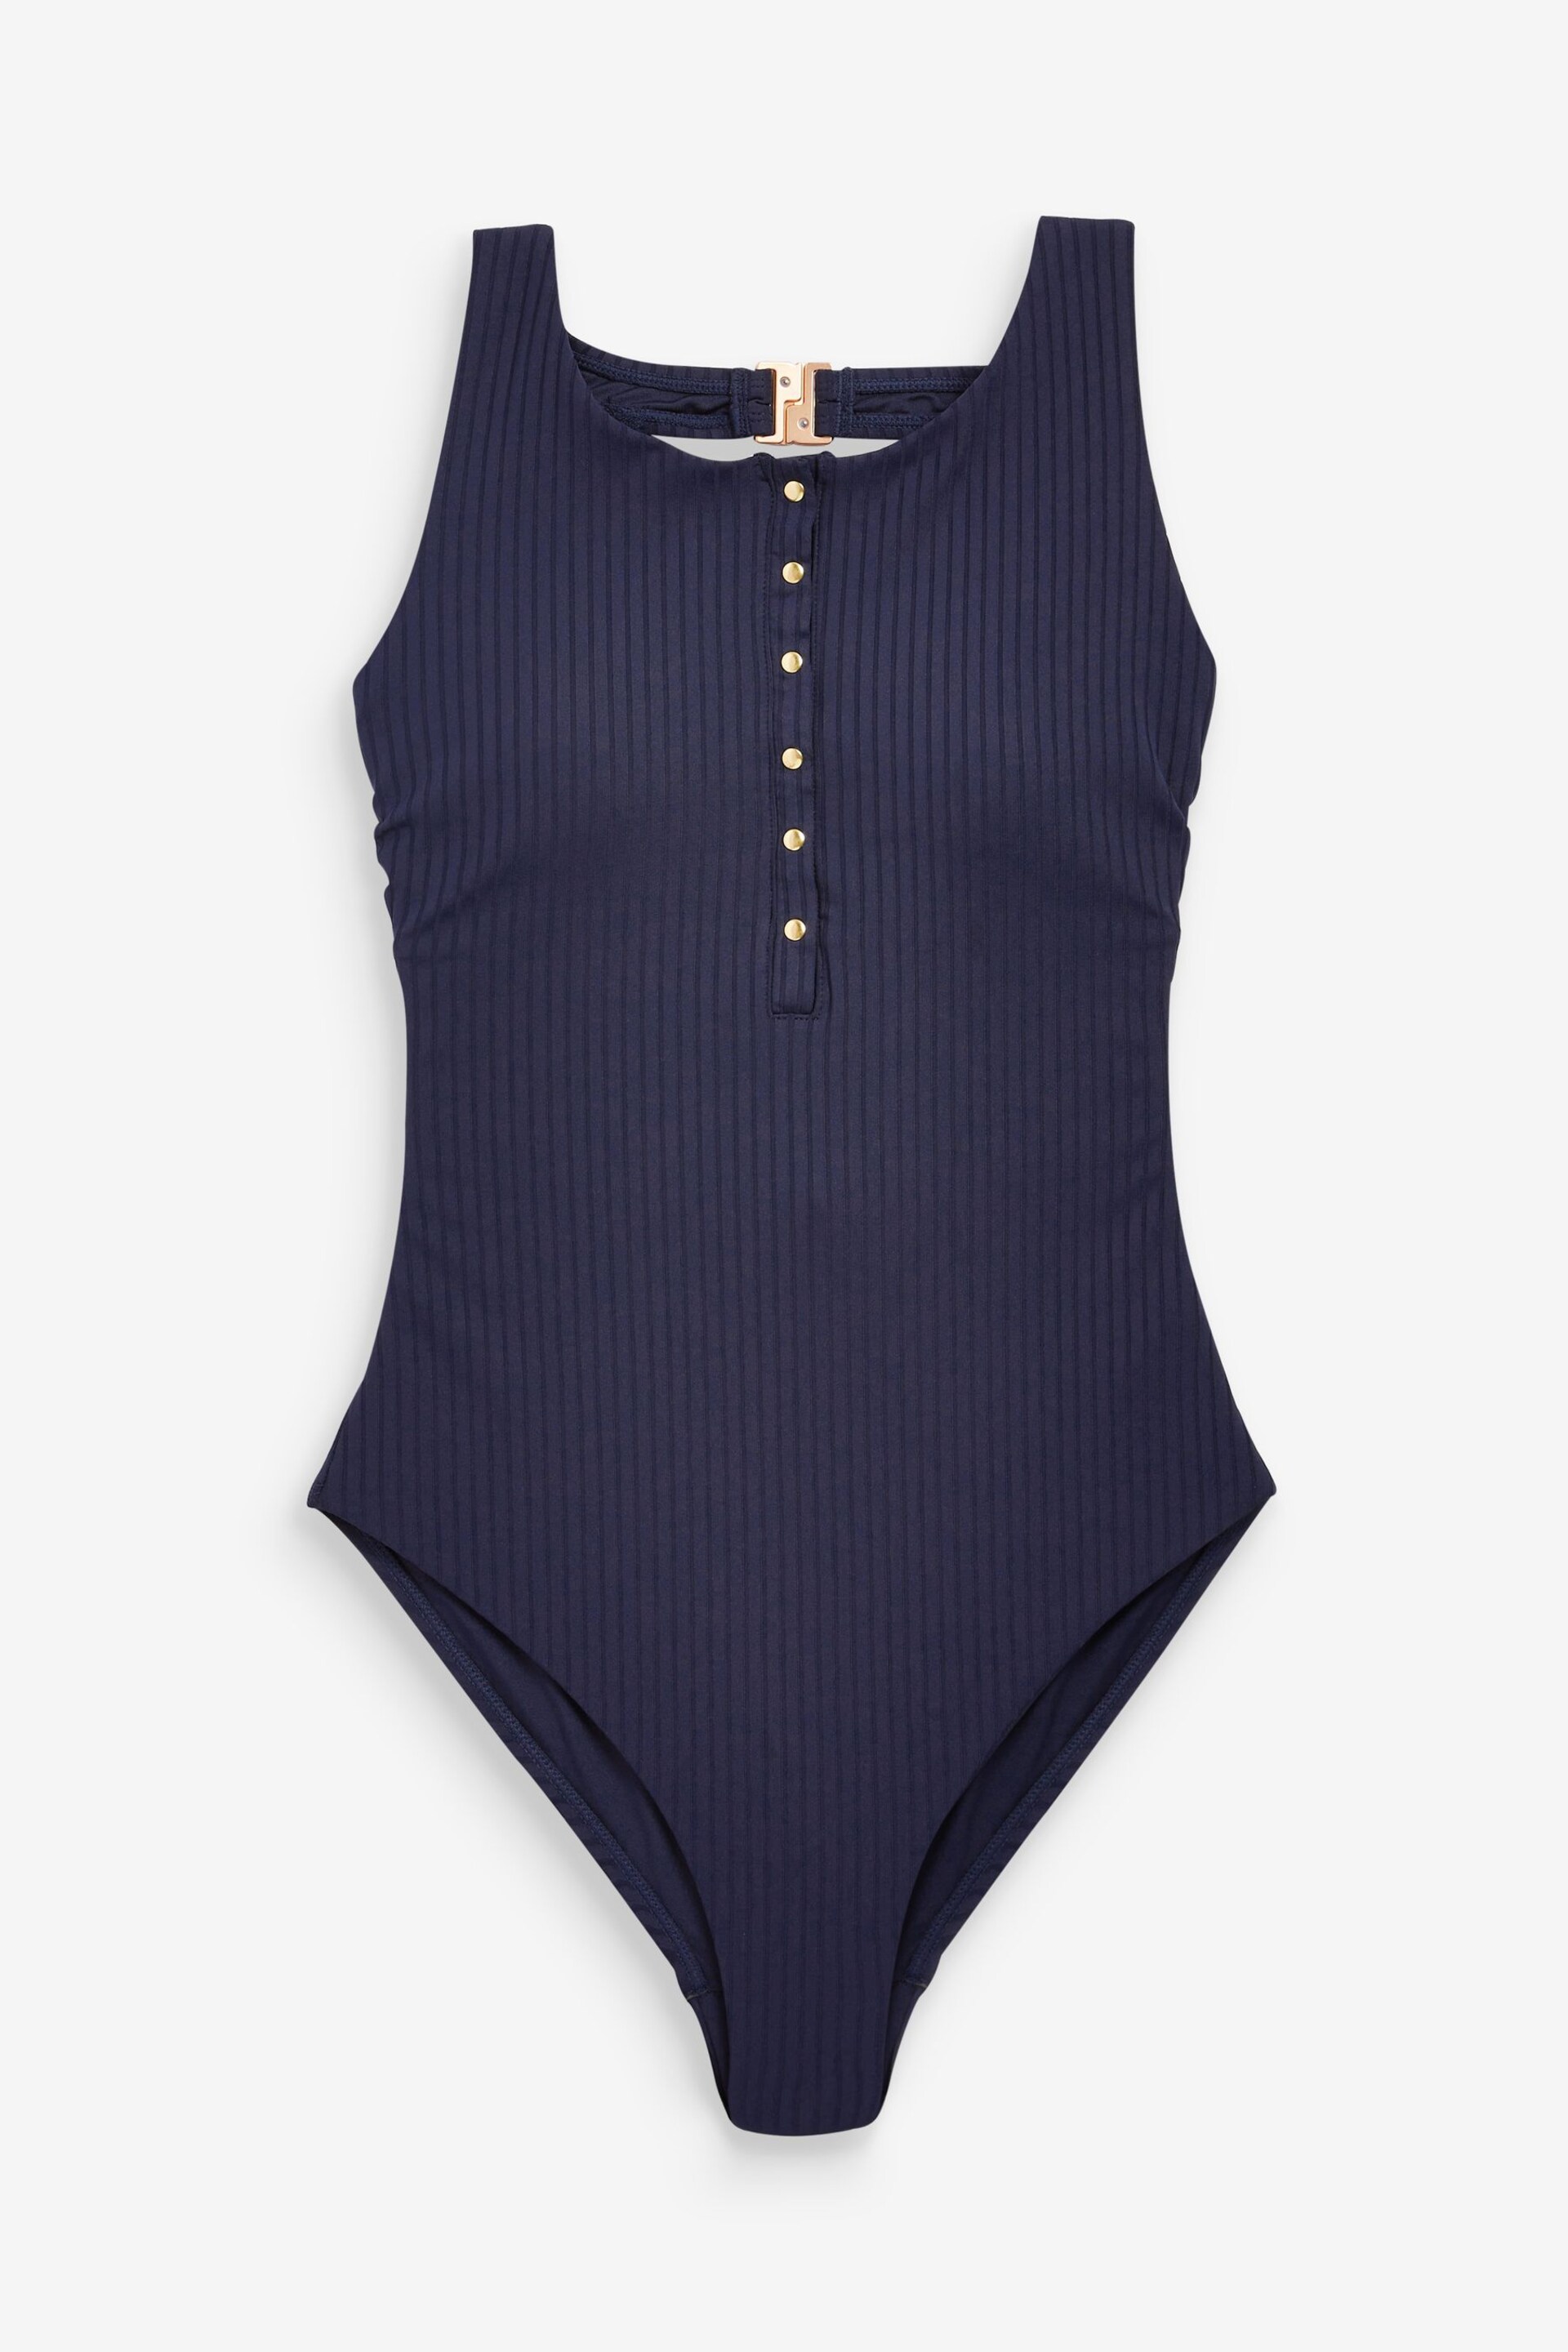 Navy Blue Rib High Neck Tummy Shaping Control Popper Swimsuit - Image 9 of 9